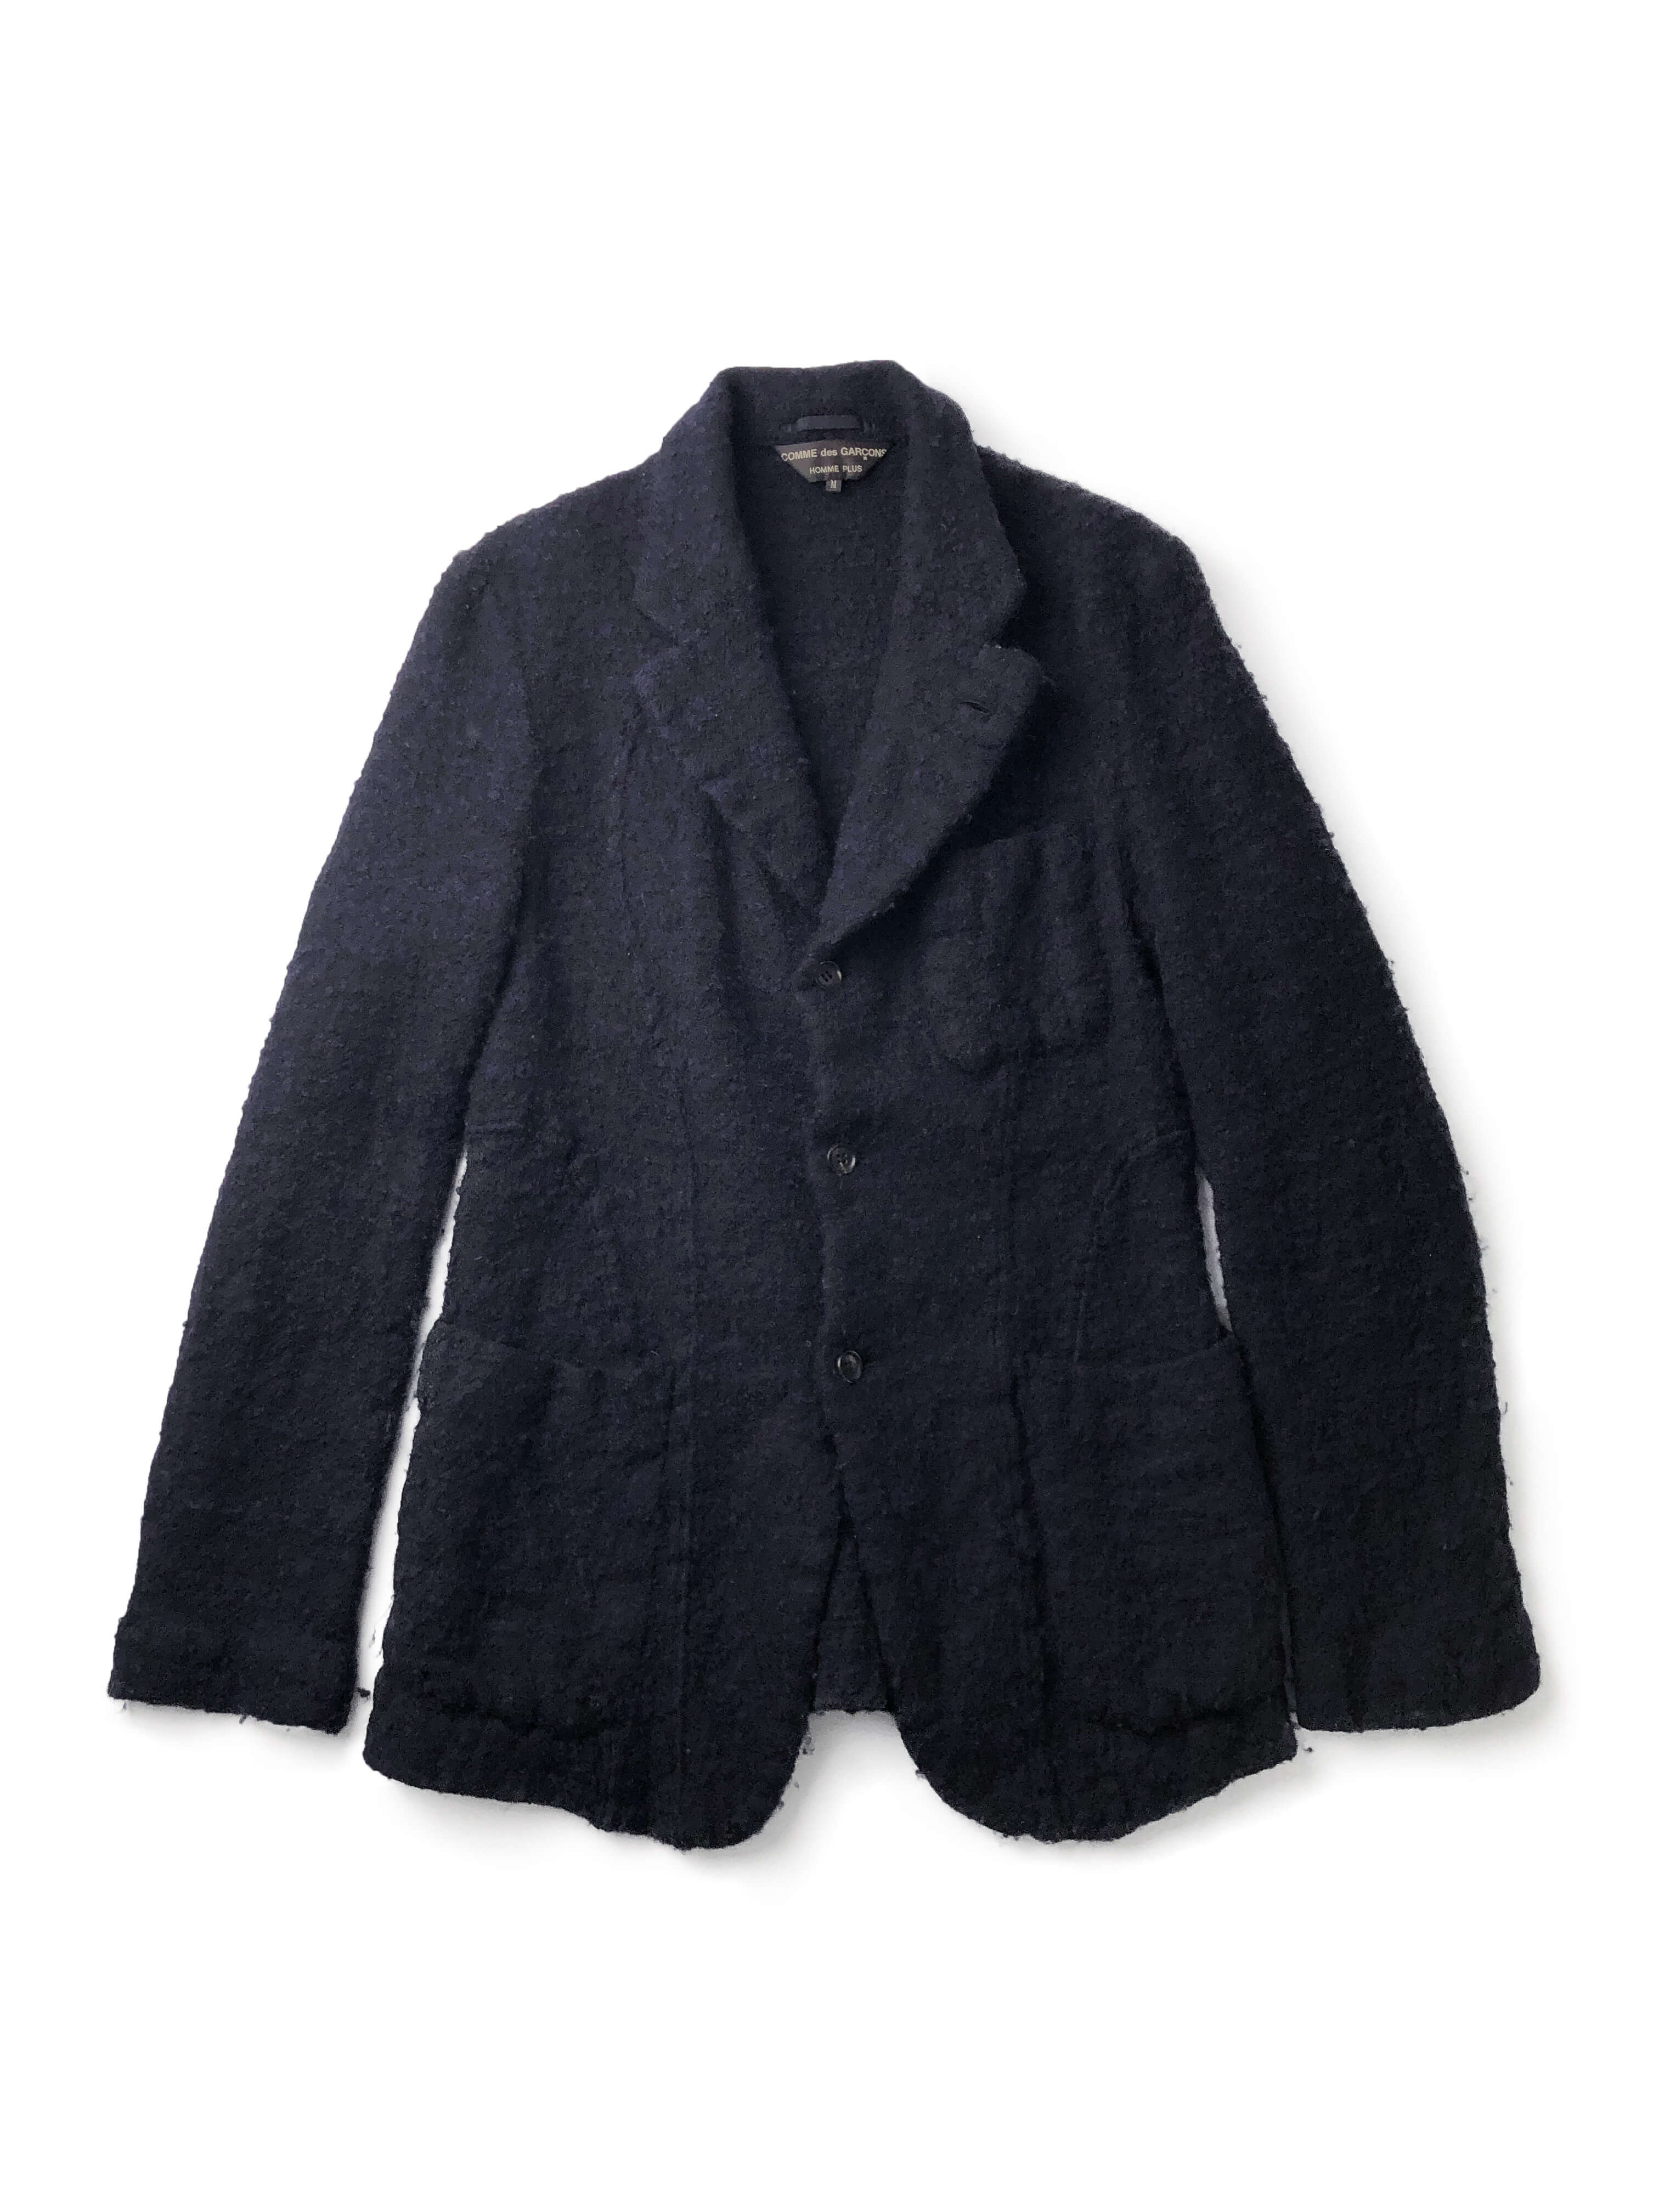 COMME des GARCONS HOMME PLUS 2003aw boiled wool blazer